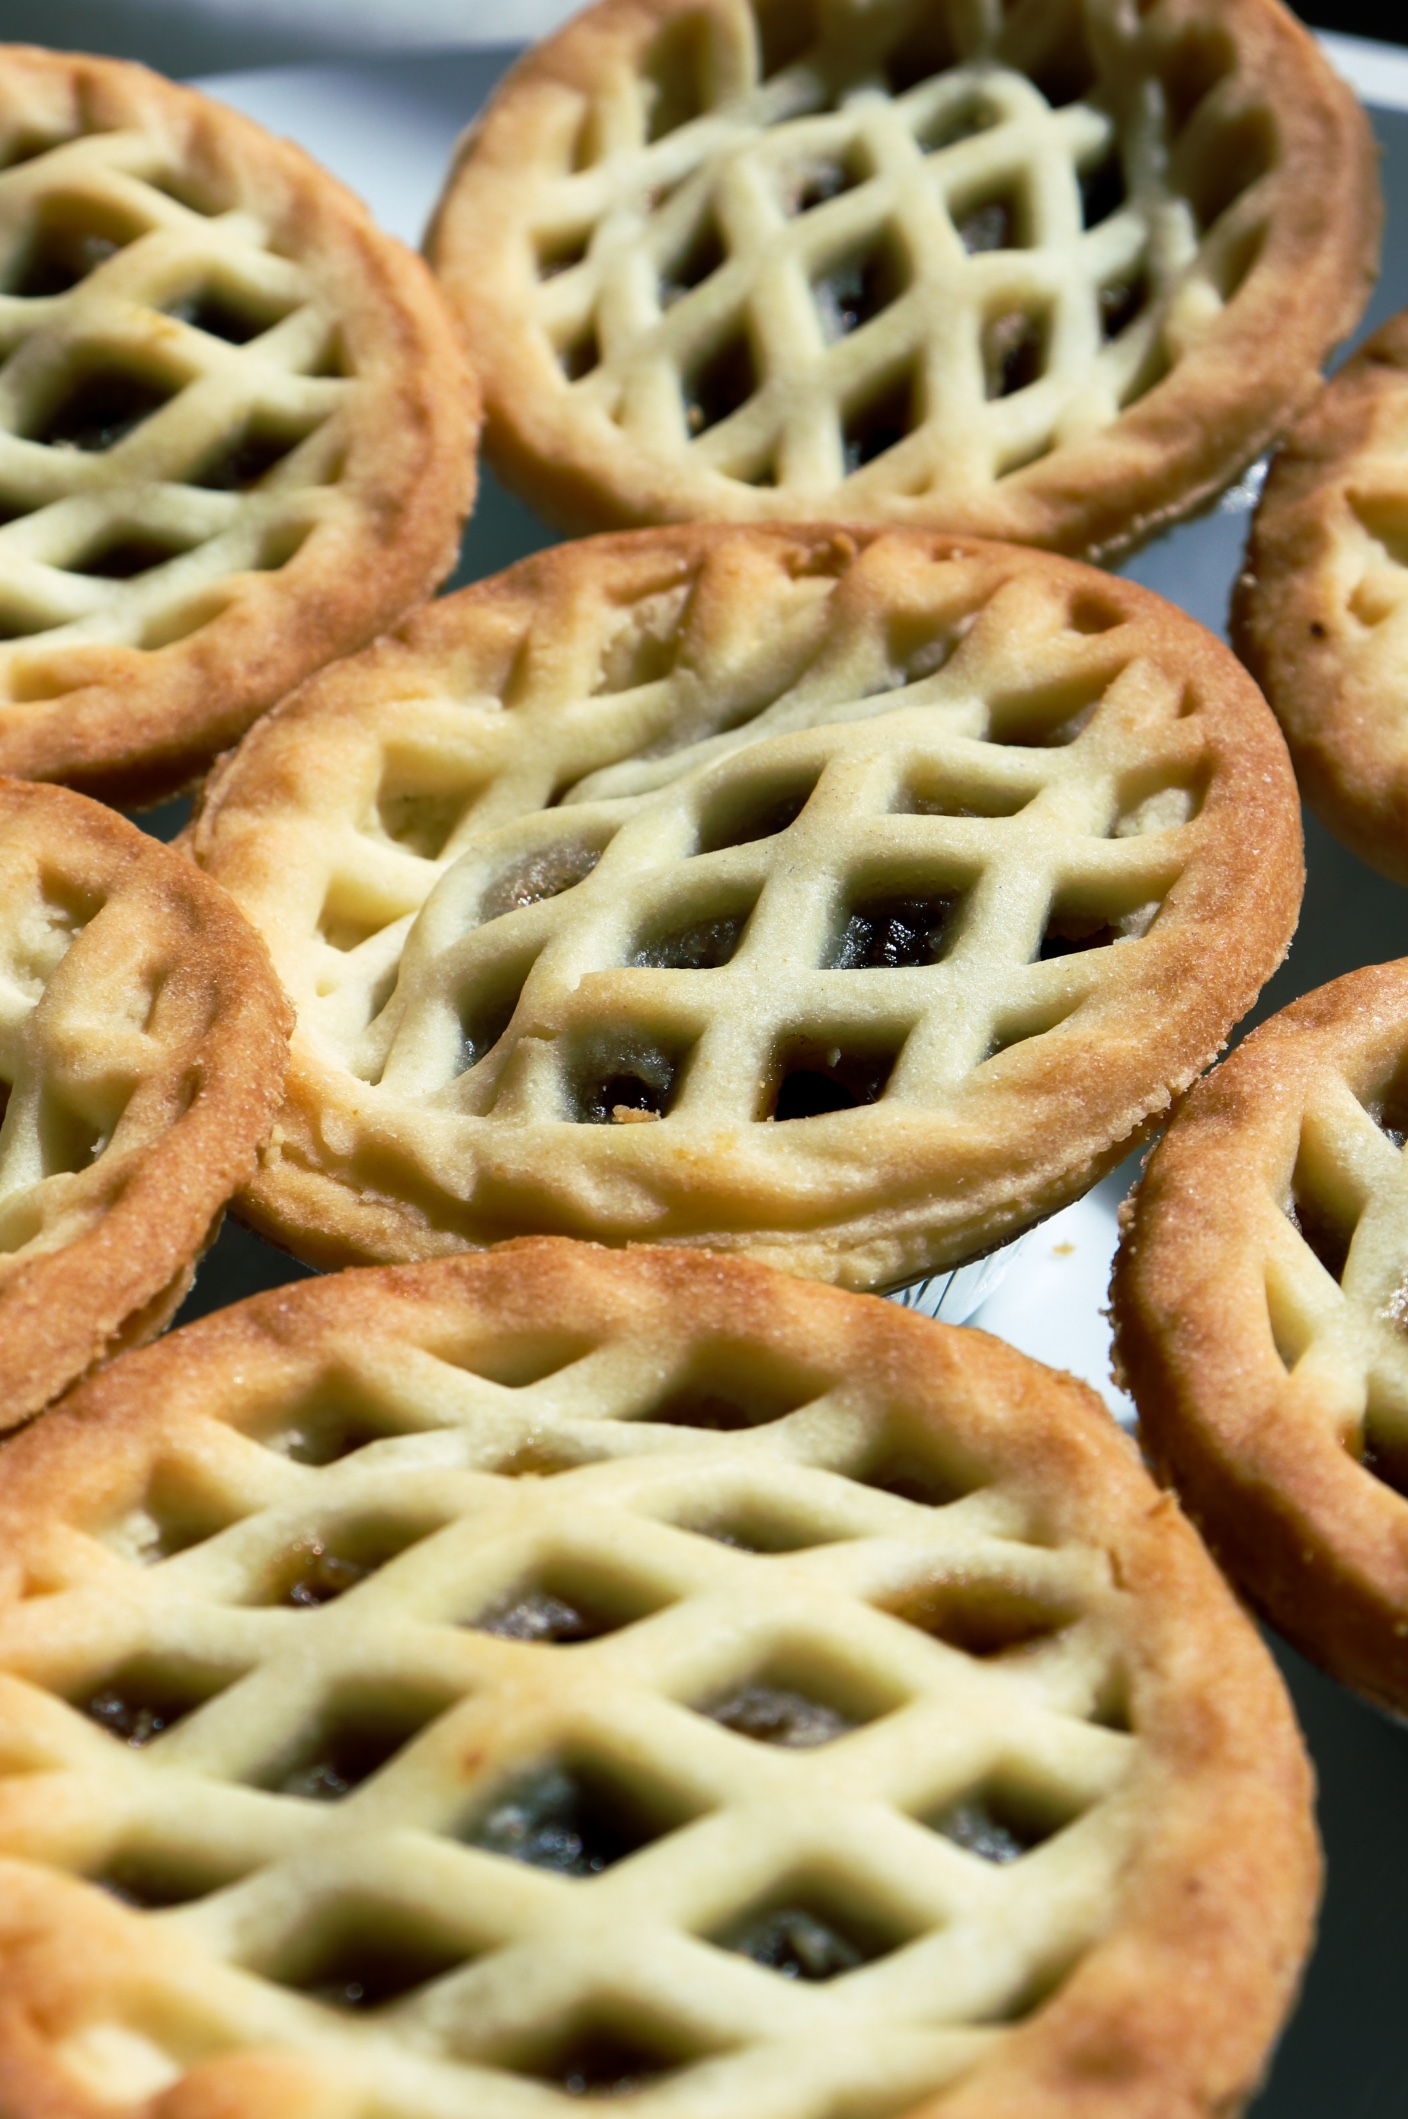 A guide to taking mouth-watering photos of pies and other desserts.